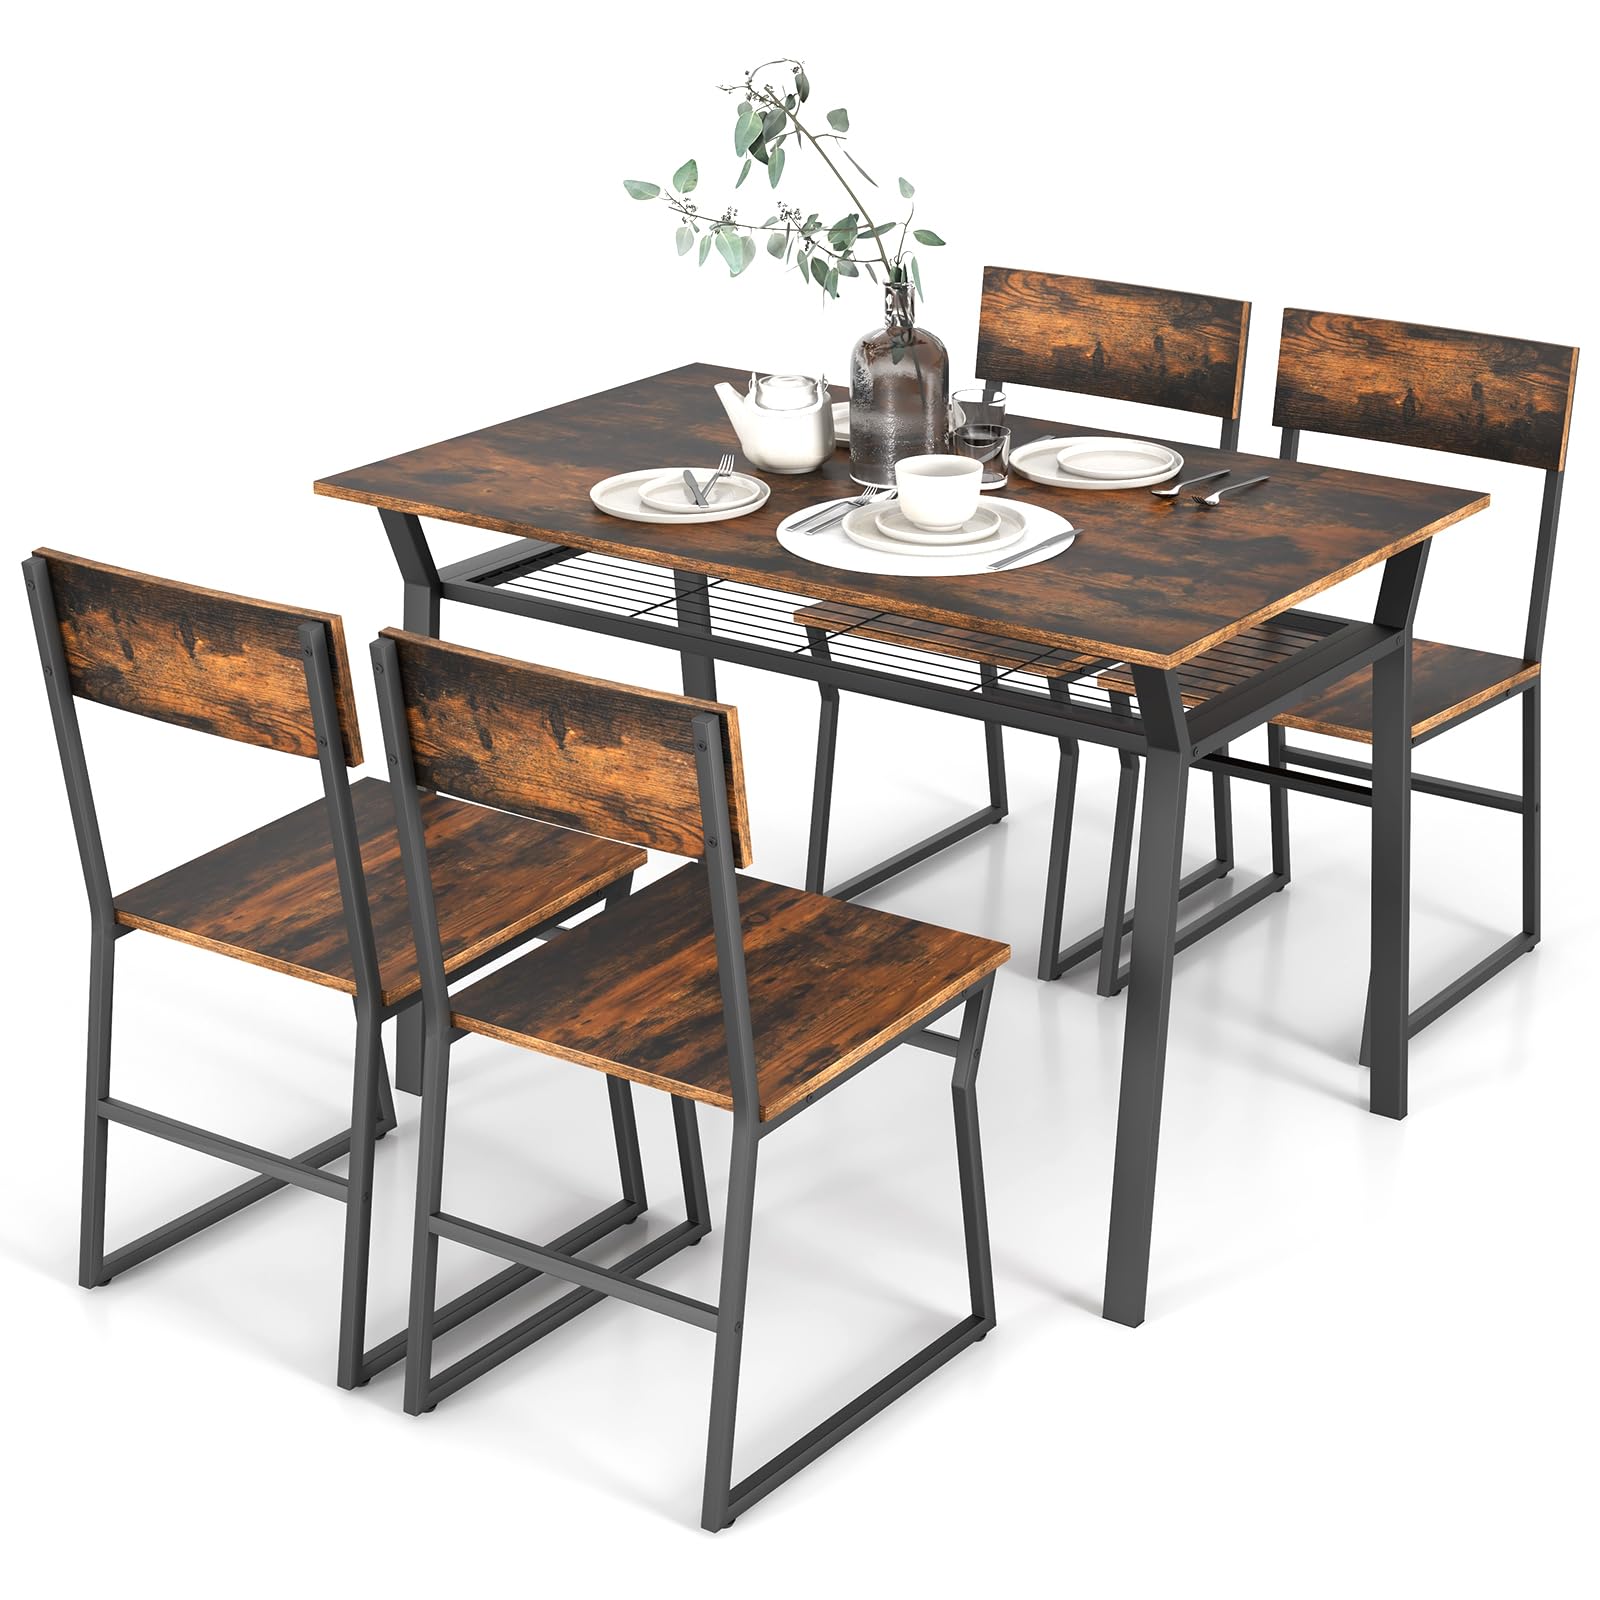 Giantex Dining Table Set for 4, 47”L x 28”W Rectangular Kitchen Table w/ 4 Trapezoid Chairs